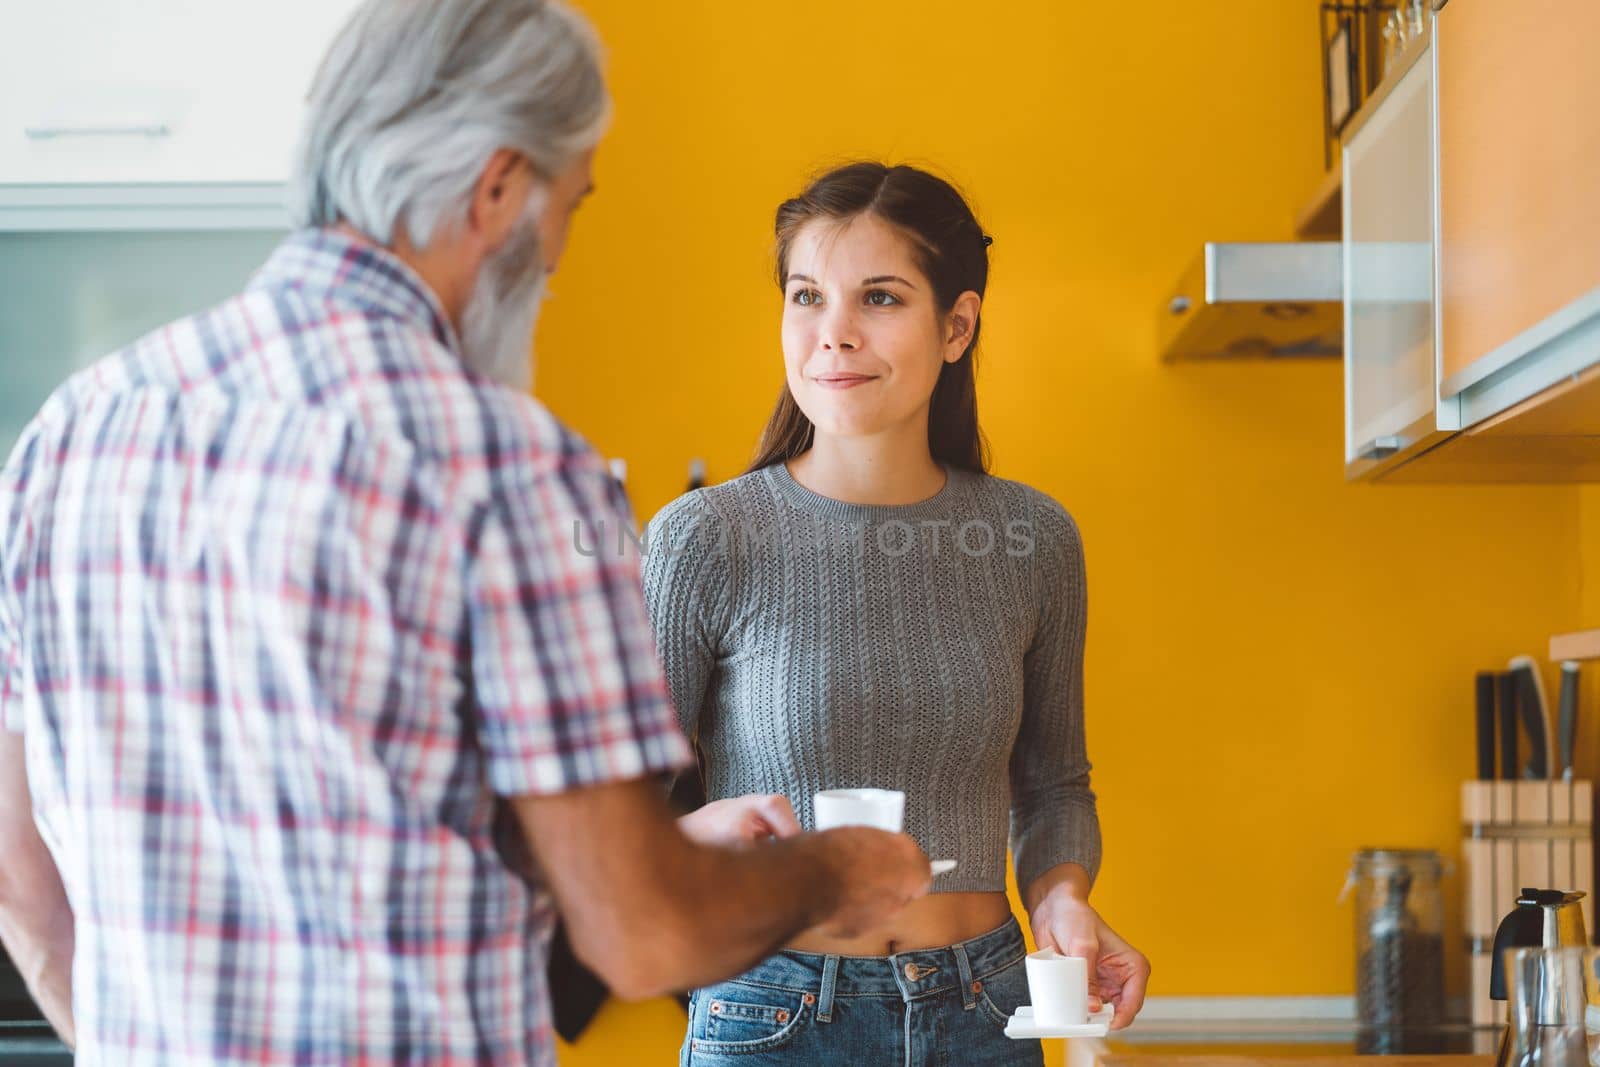 Young caucasian woman taking care of her grandfather, senior man with beard and grey hair. Granddaughter visiting her grandfather, spending quality time together.